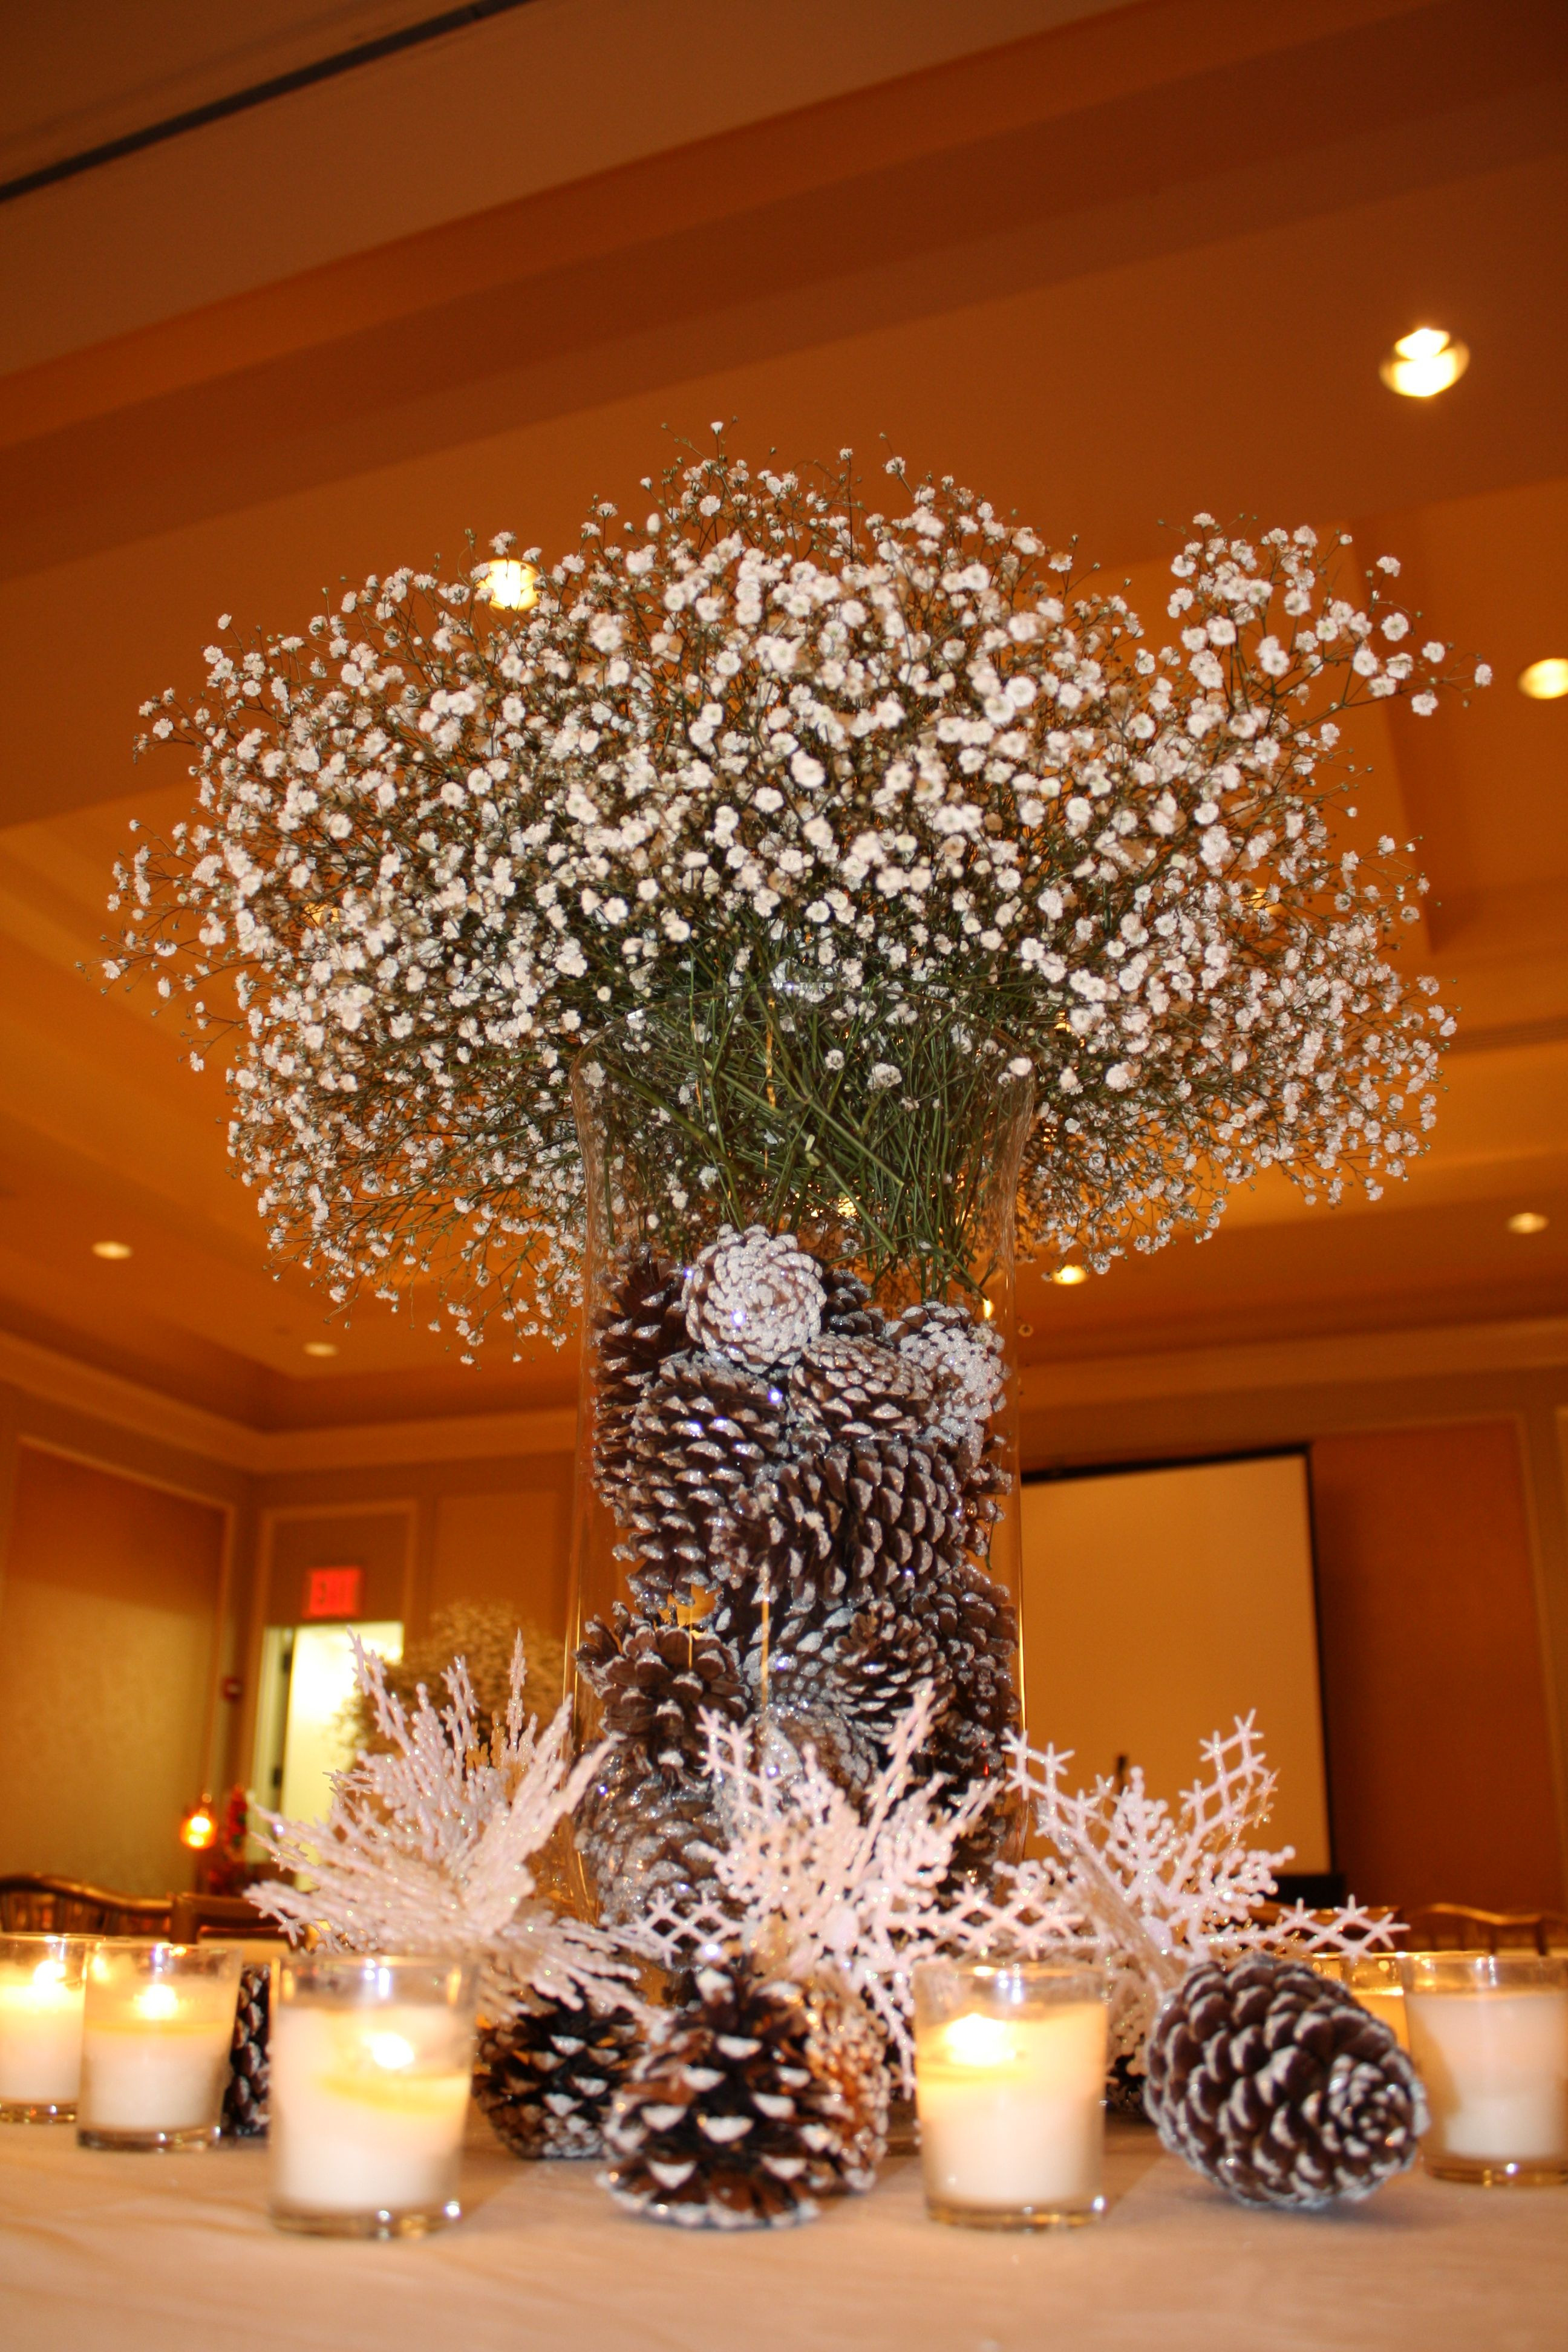 Holiday Party Centerpiece Ideas
 Corporate Holiday Party Centerpiece